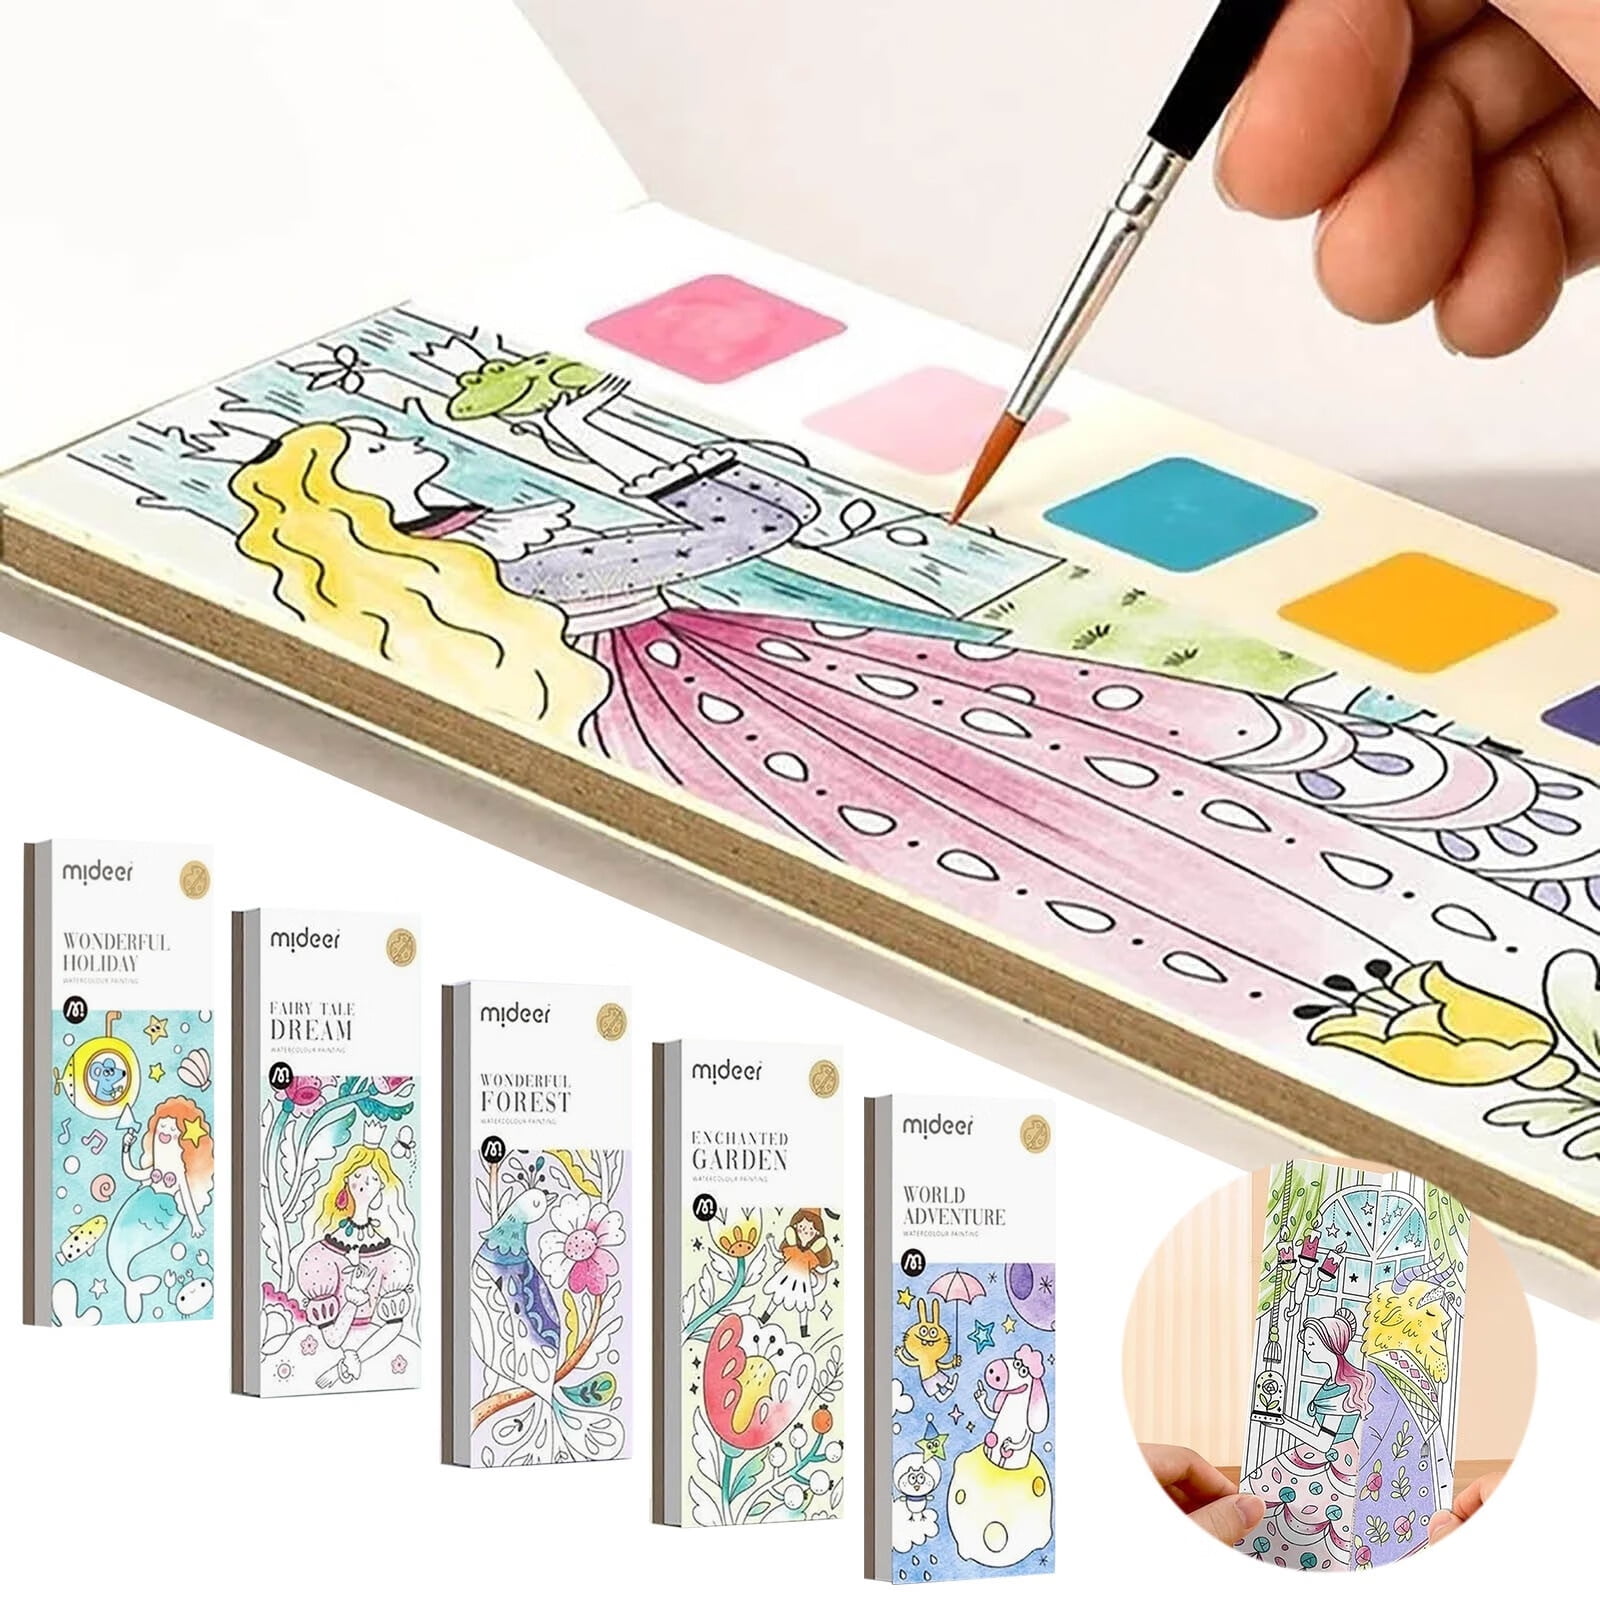 Pousbo Pocket Watercolor Painting Book, Wonderful Forest Paint with Water  Book Magic Water Coloring Books for Kids, Premium Watercolor Paint Bookmark